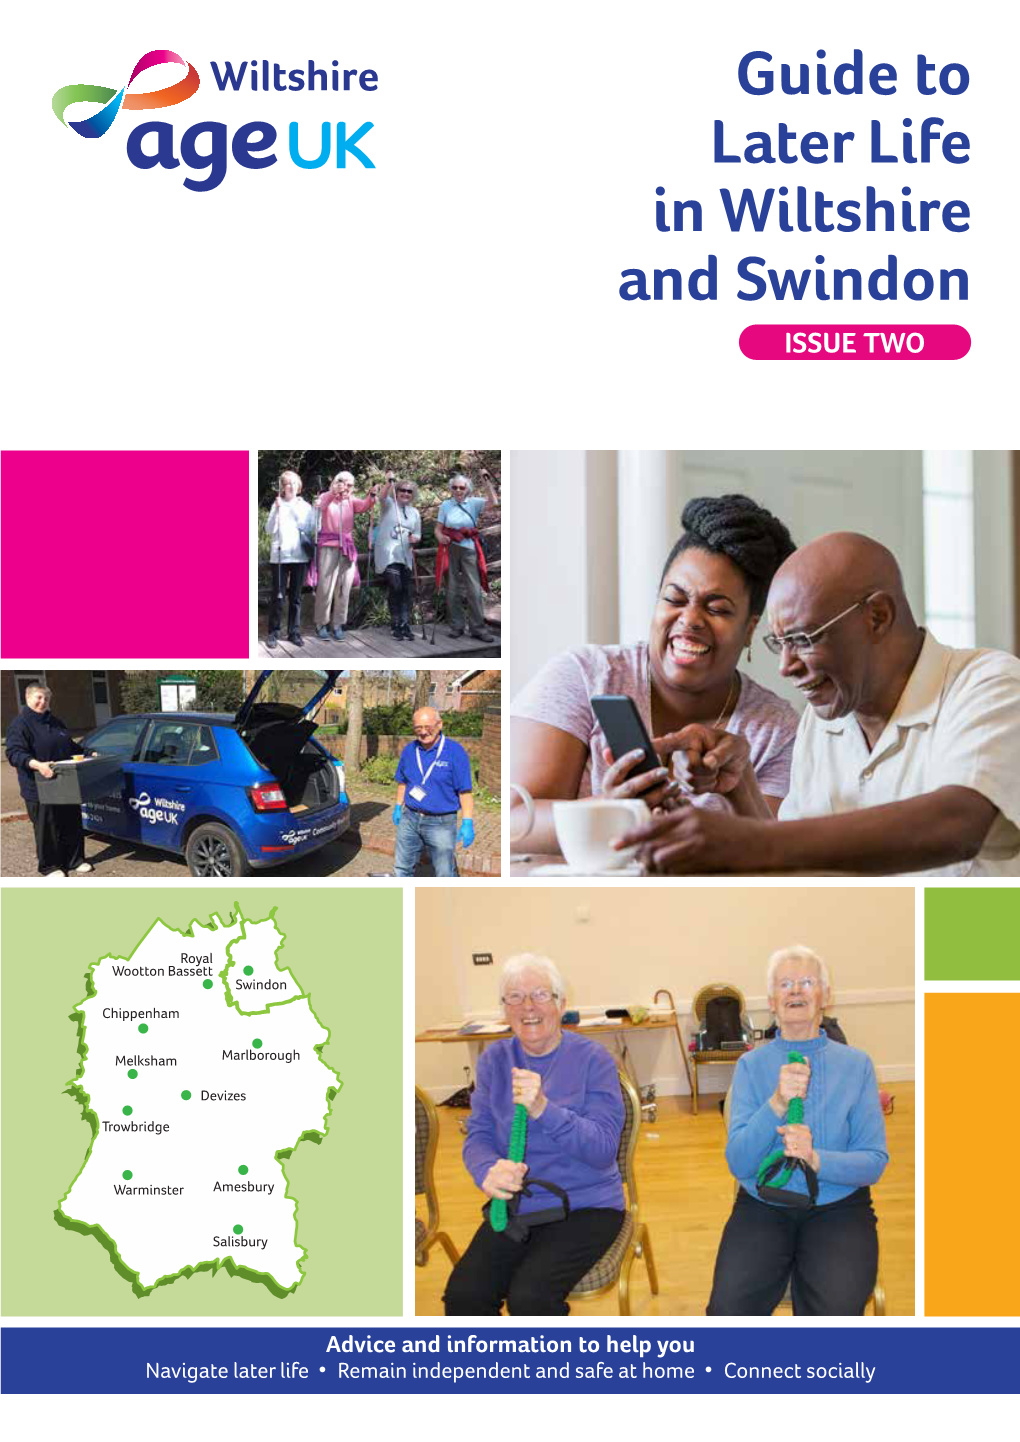 Guide to Later Life in Wiltshire and Swindon ISSUE TWO